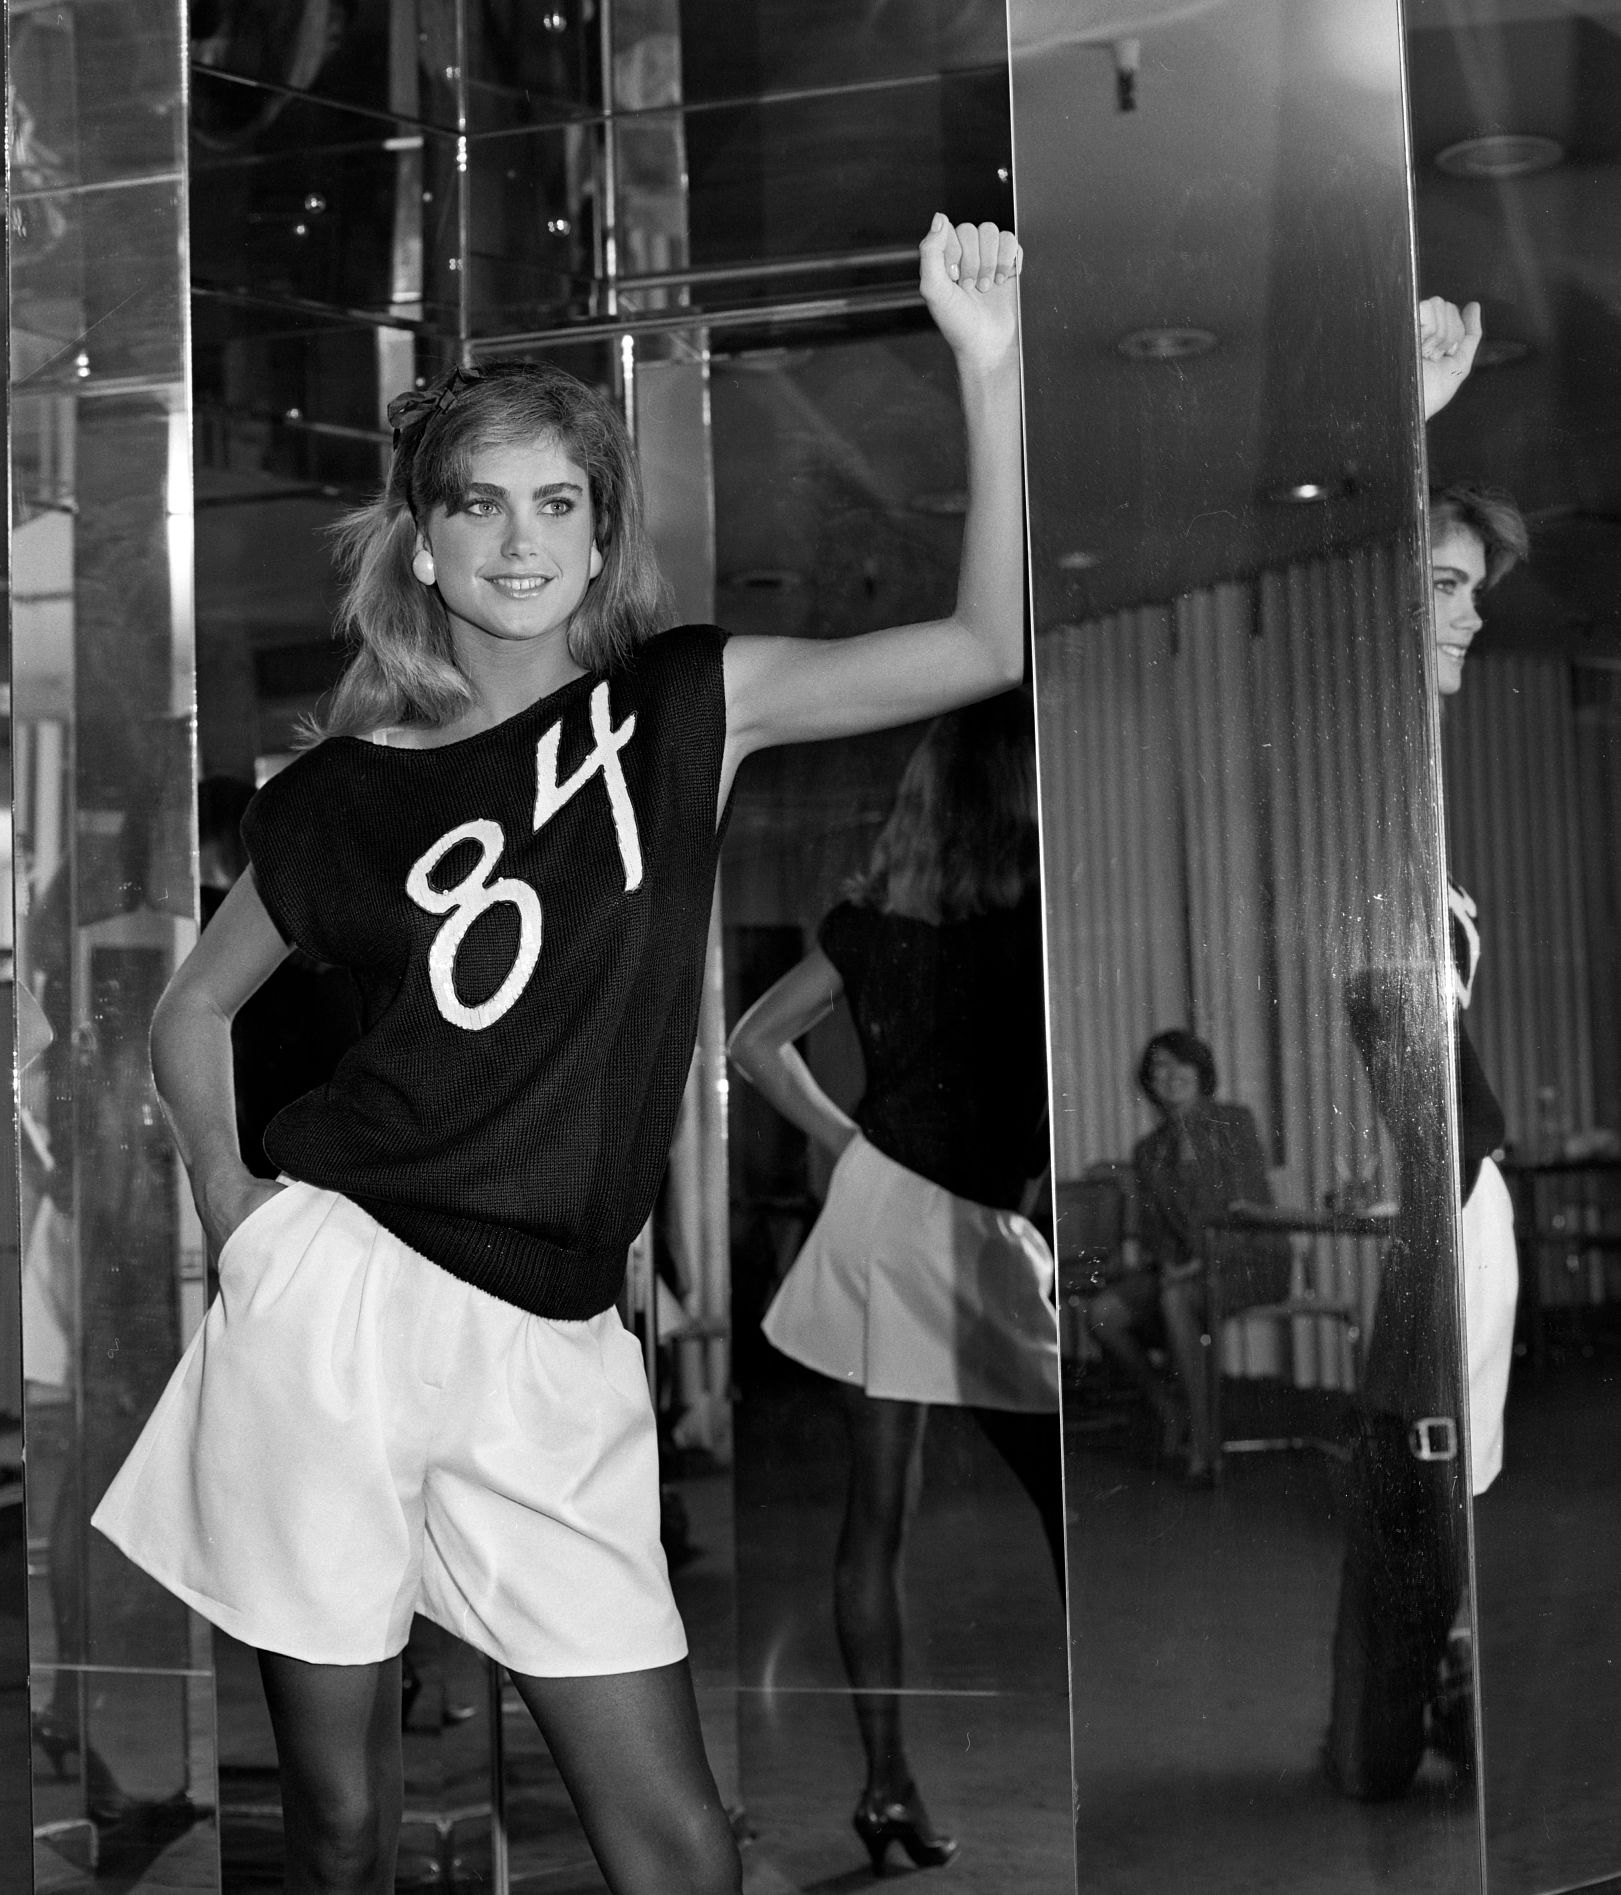 Kathy Ireland with full-length mirrors all around her, wearing black shirt with number 84 on it and white shorts